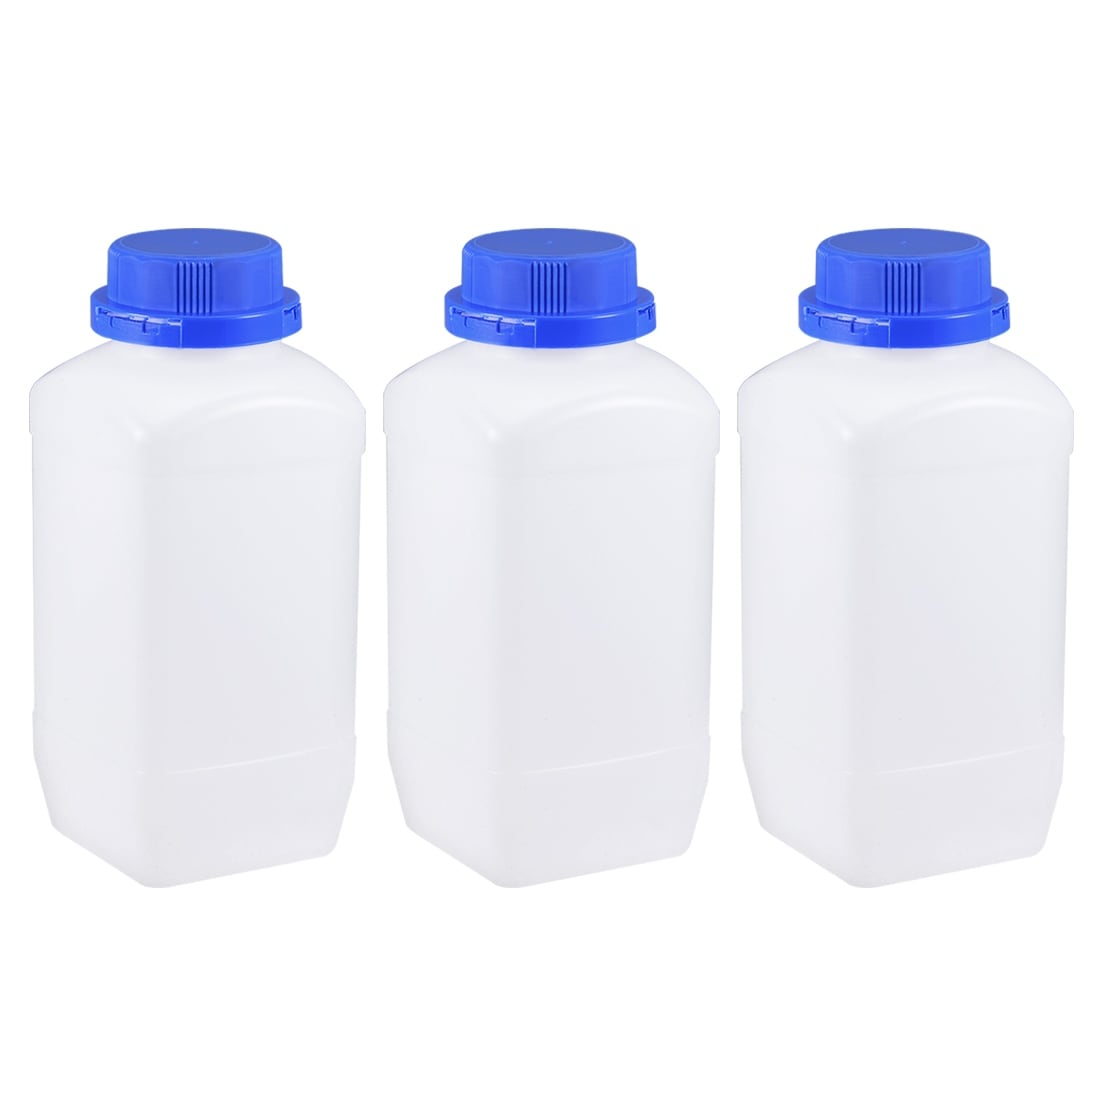 Liquid Chemical Containers